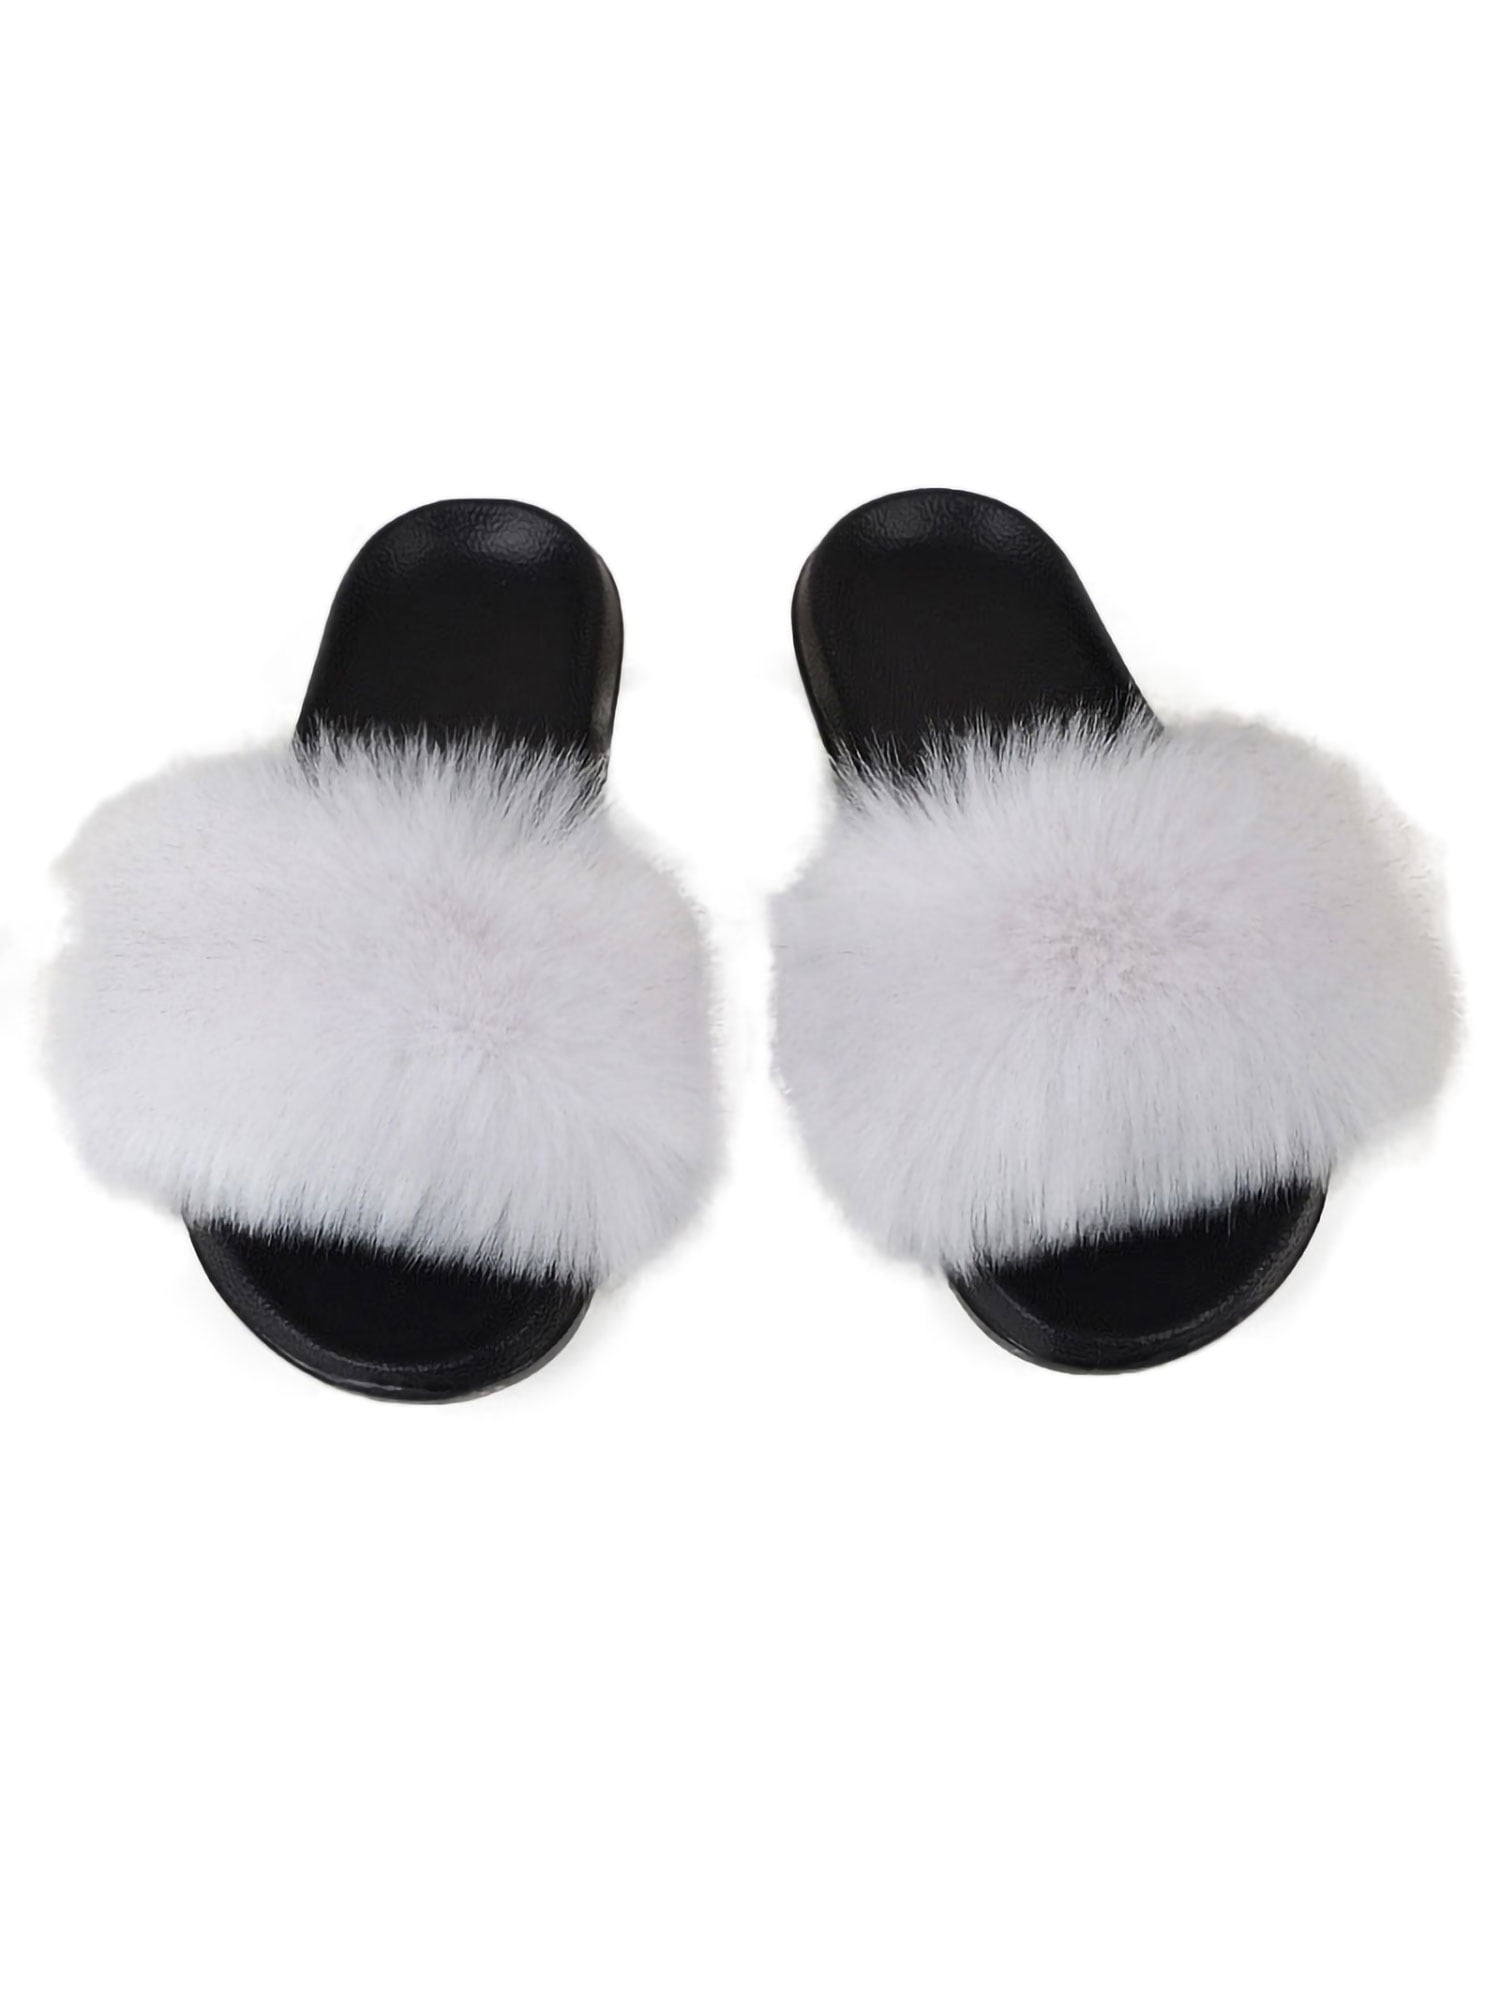 Details about   Women Fluffy Fur Fluffy Sliders Open Toe Ladies Winter Slippers Mules Shoes Size 